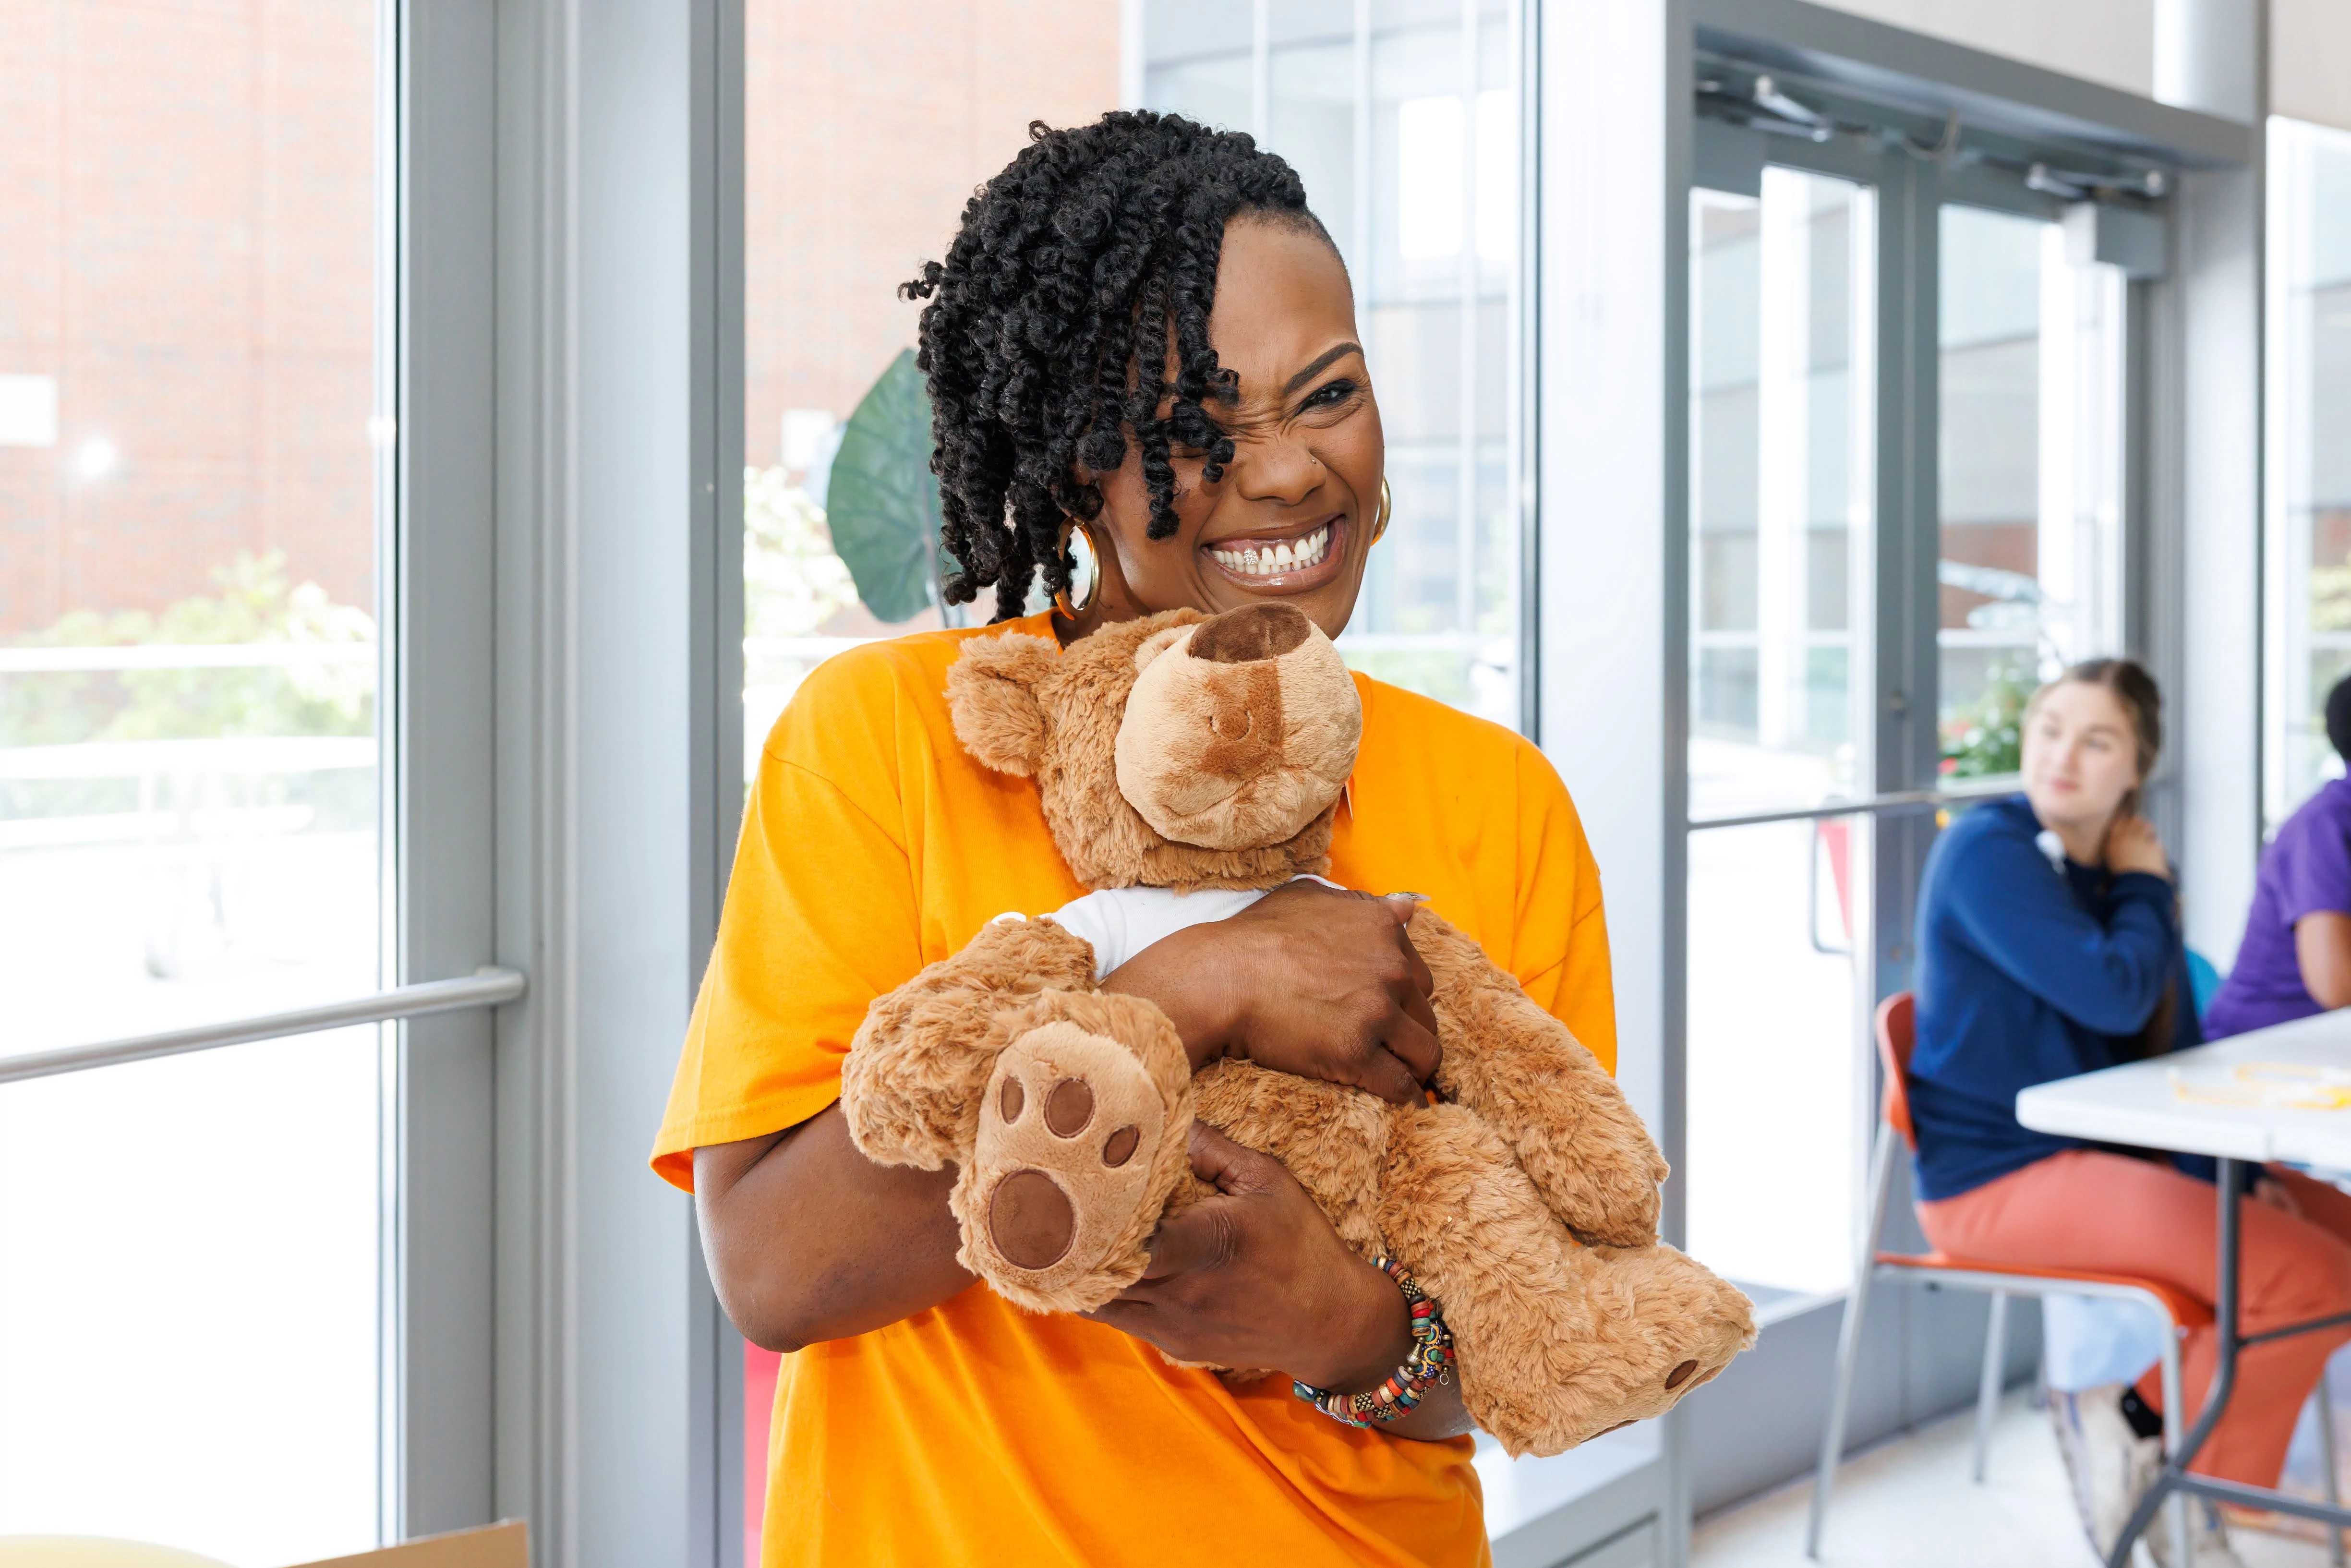 Image of Spire employee holding a teddy bear at Children's of Alabama